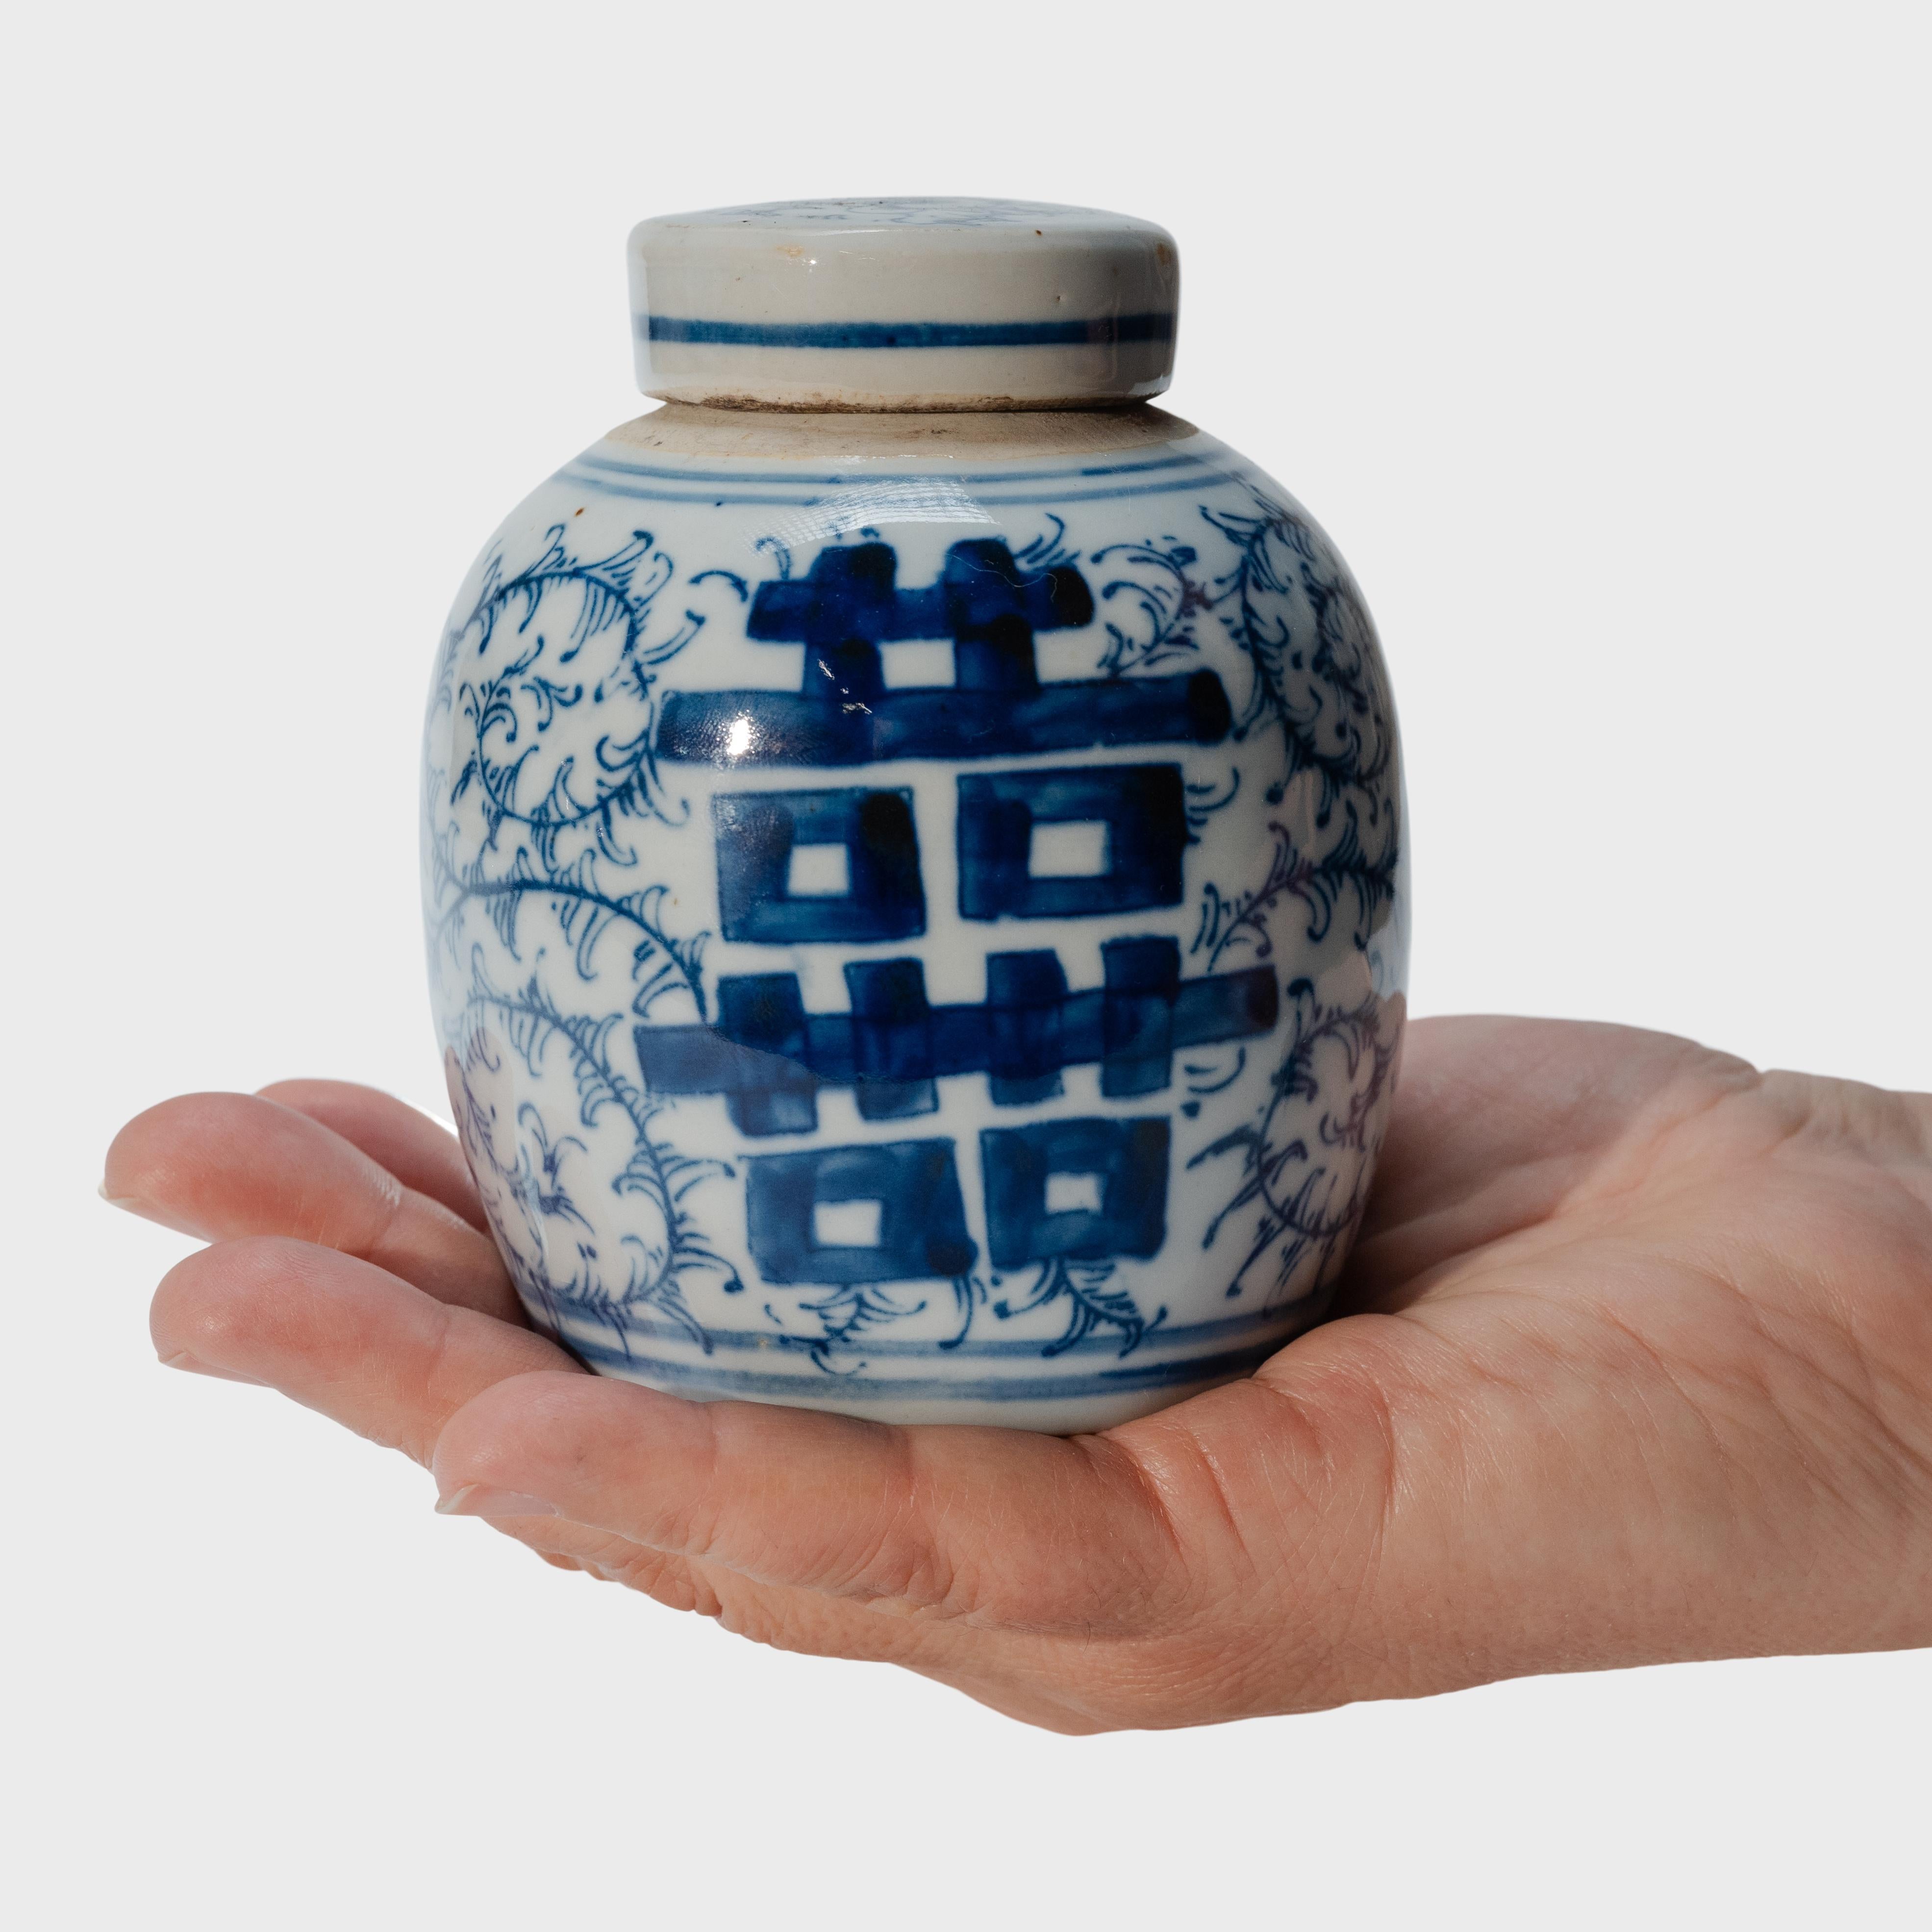 The symbol for double happiness adorns this petite tea leaf jar with best wishes for love, companionship and marital bliss. Glazed in the classic blue and white manner, the small porcelain jar has a rounded form and flat lid, a traditional shape for